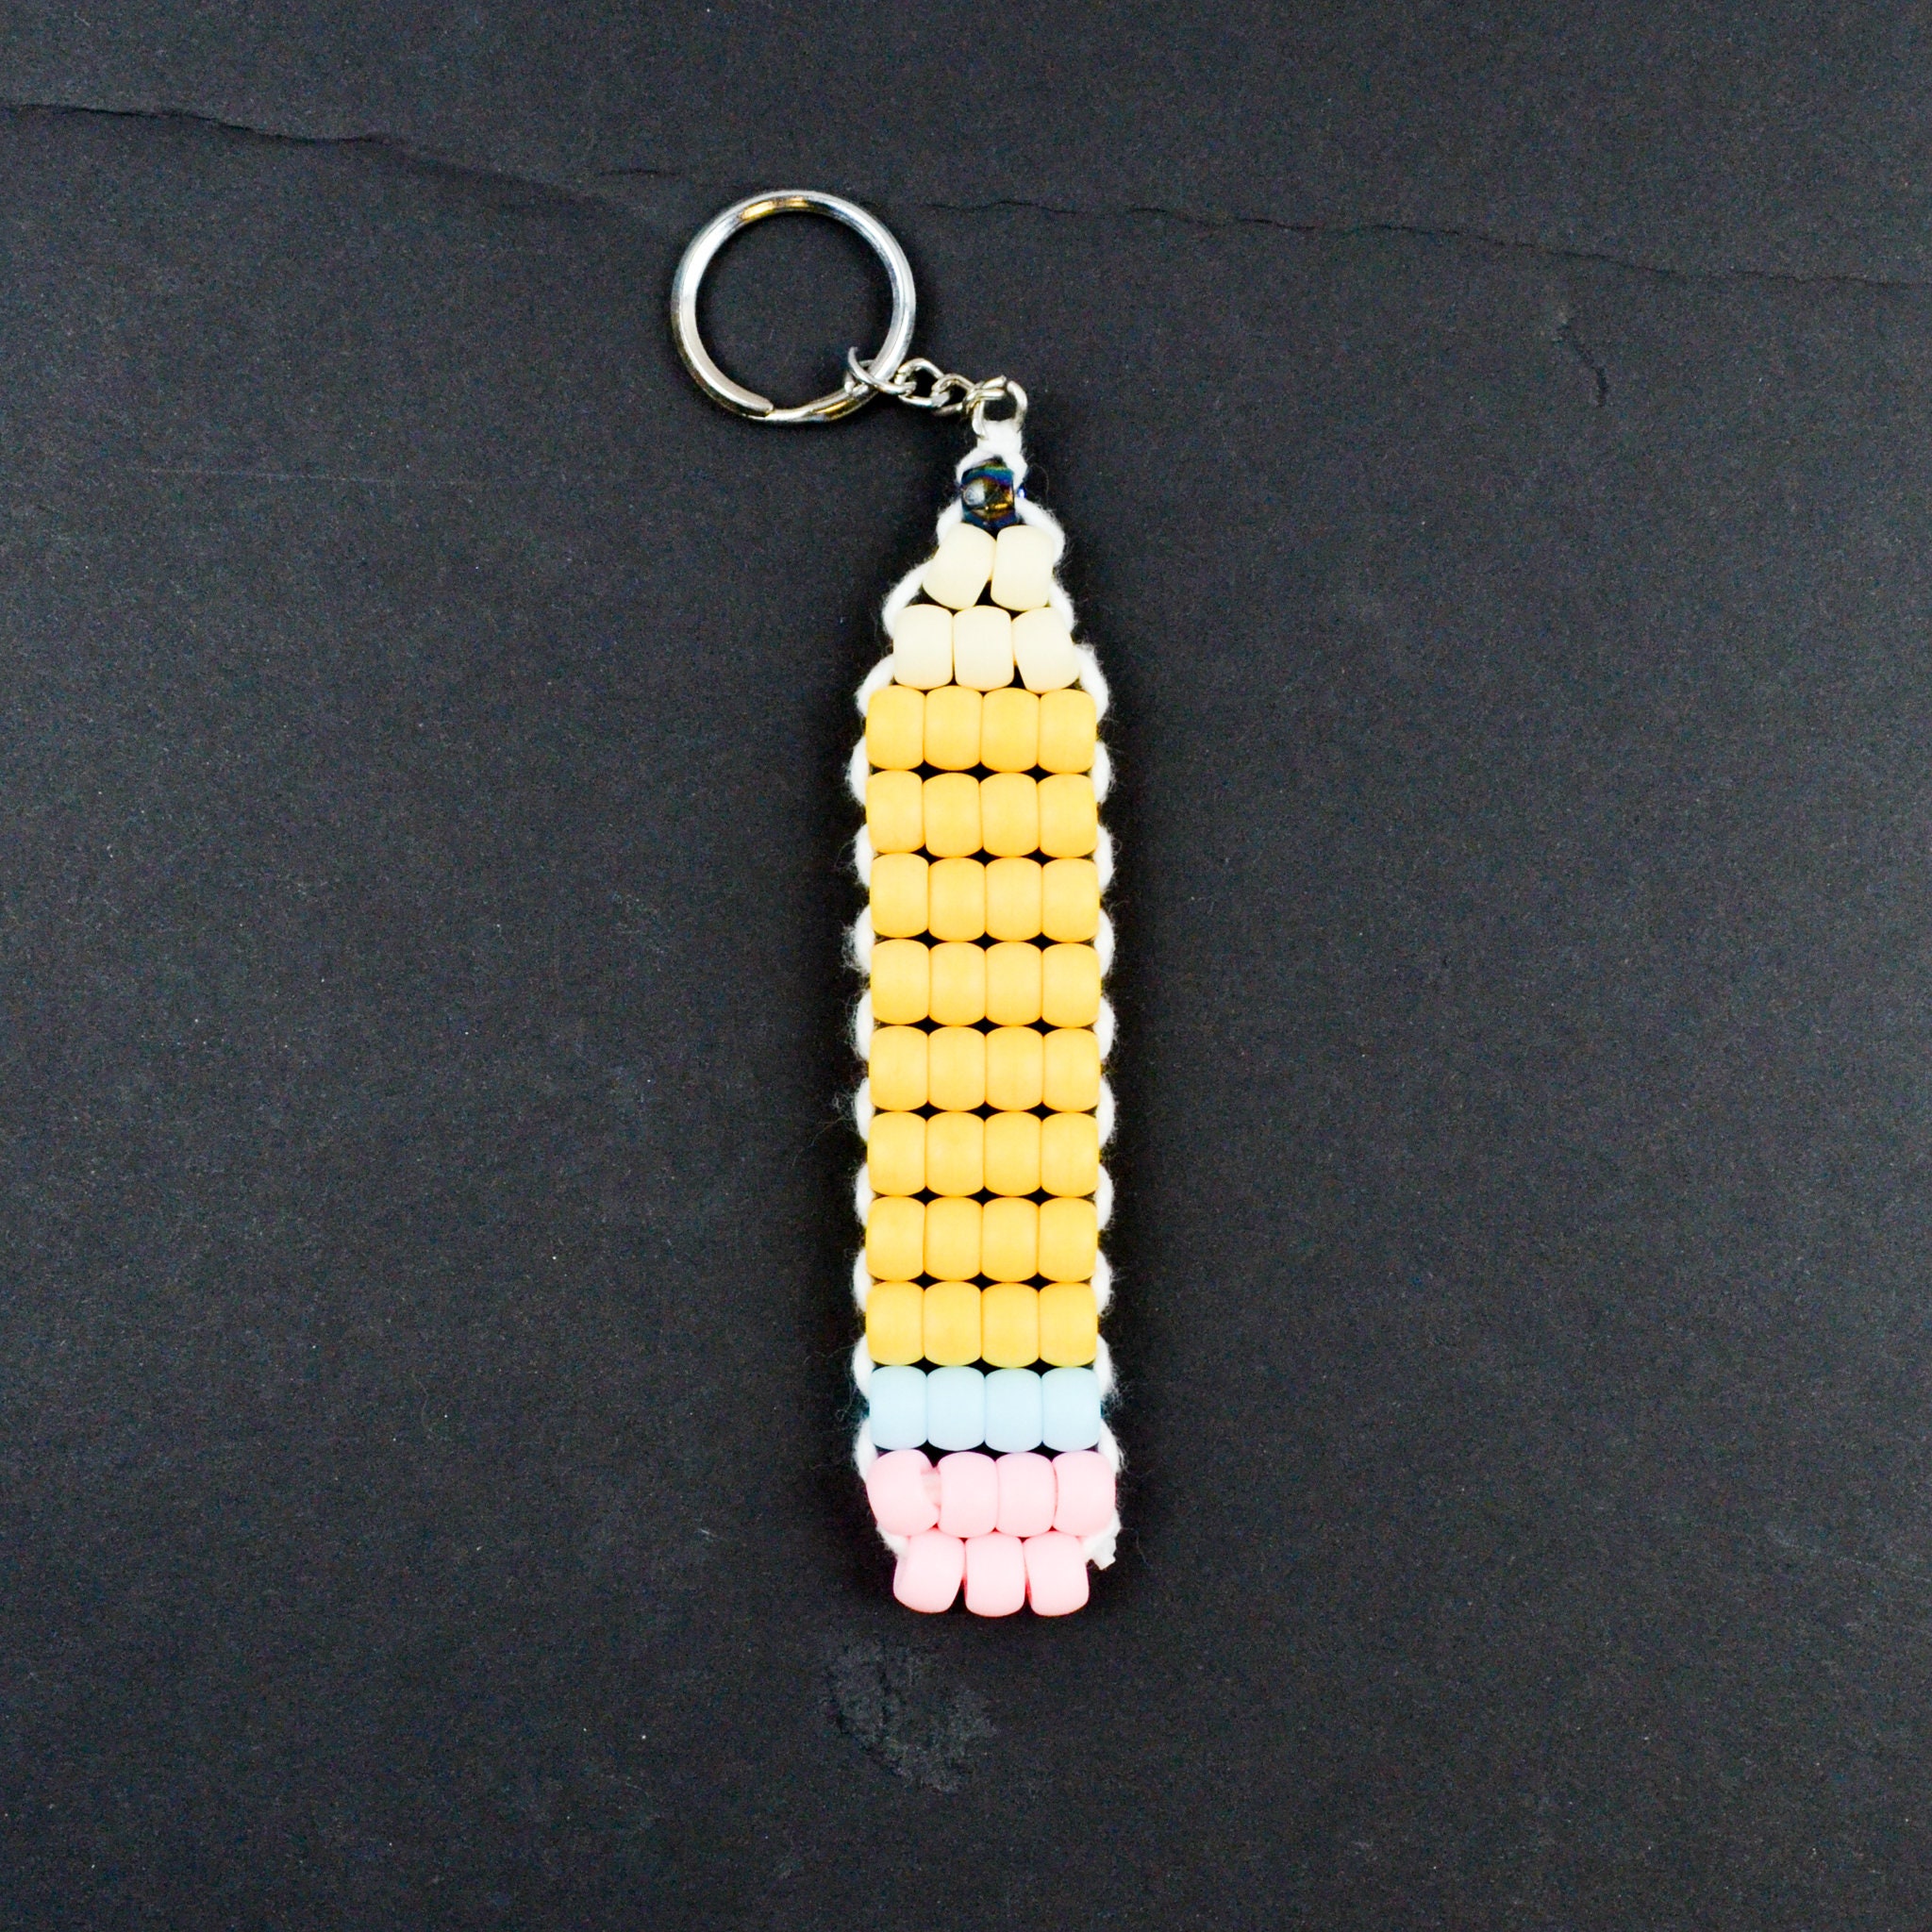 Wholesale Bead Buddy Keychain Kit for your shop